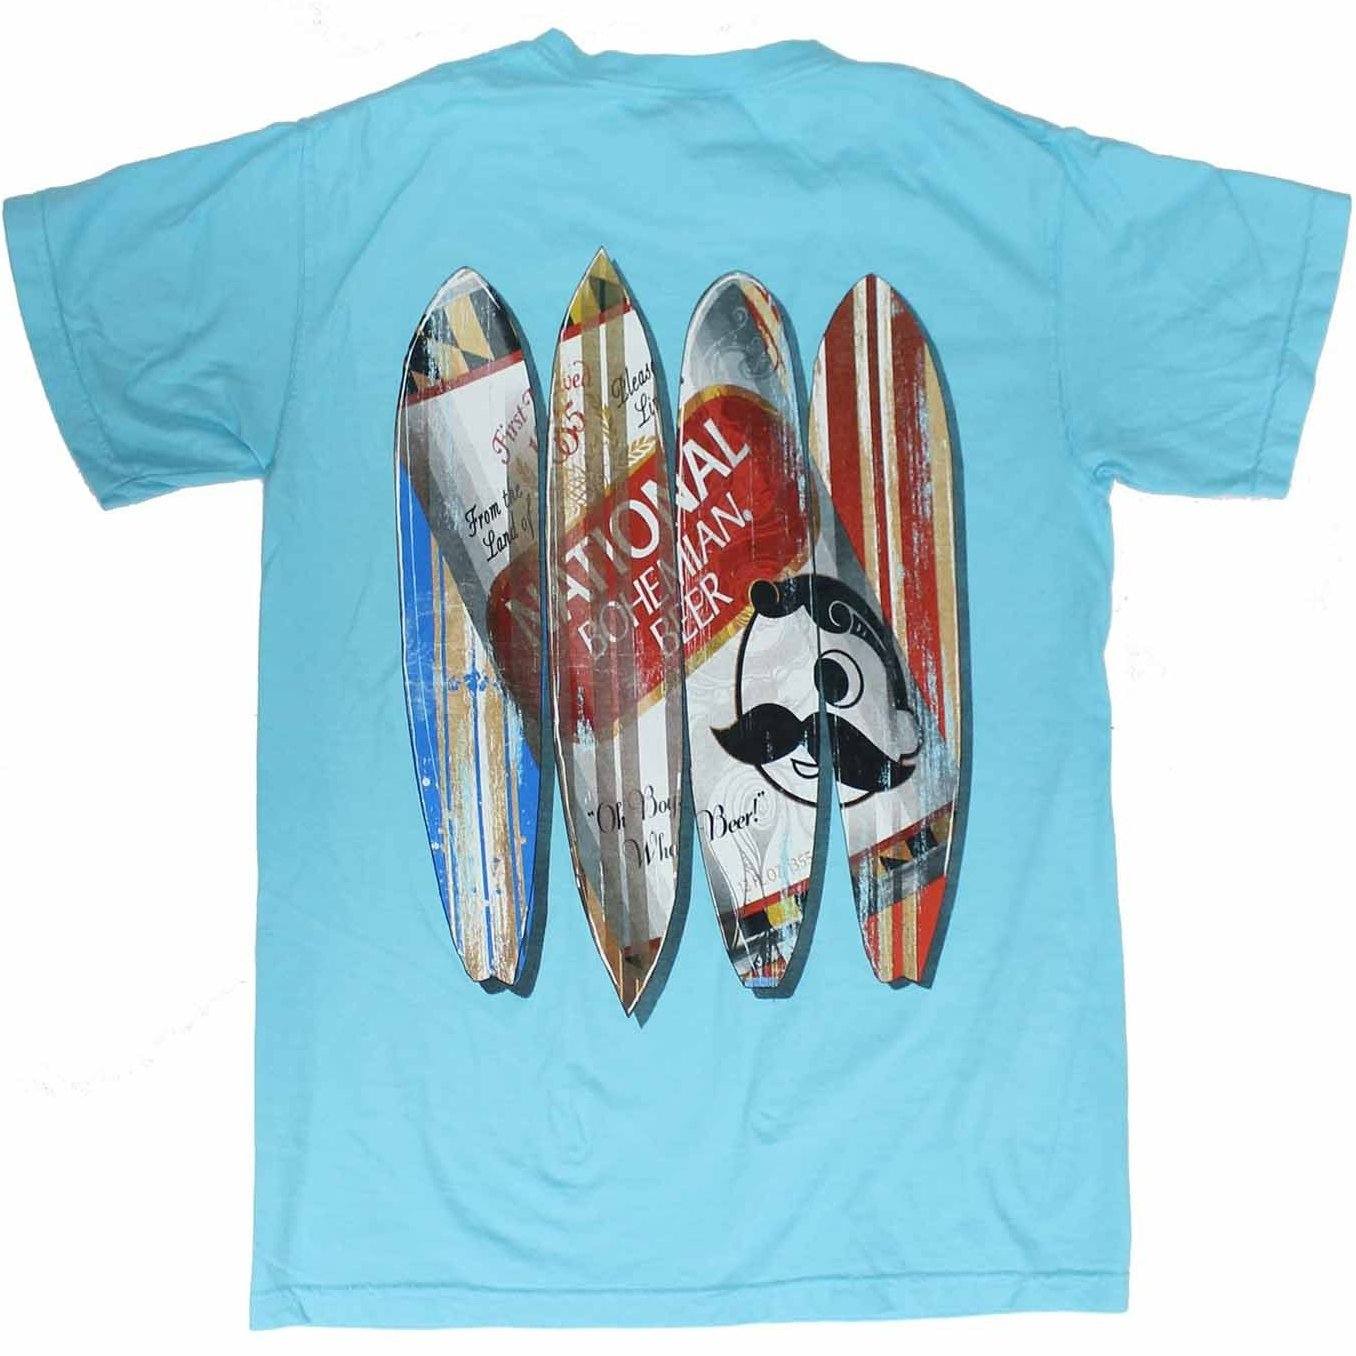 Natty Boh Can Surfboards (Lagoon Blue) / Shirt - Route One Apparel